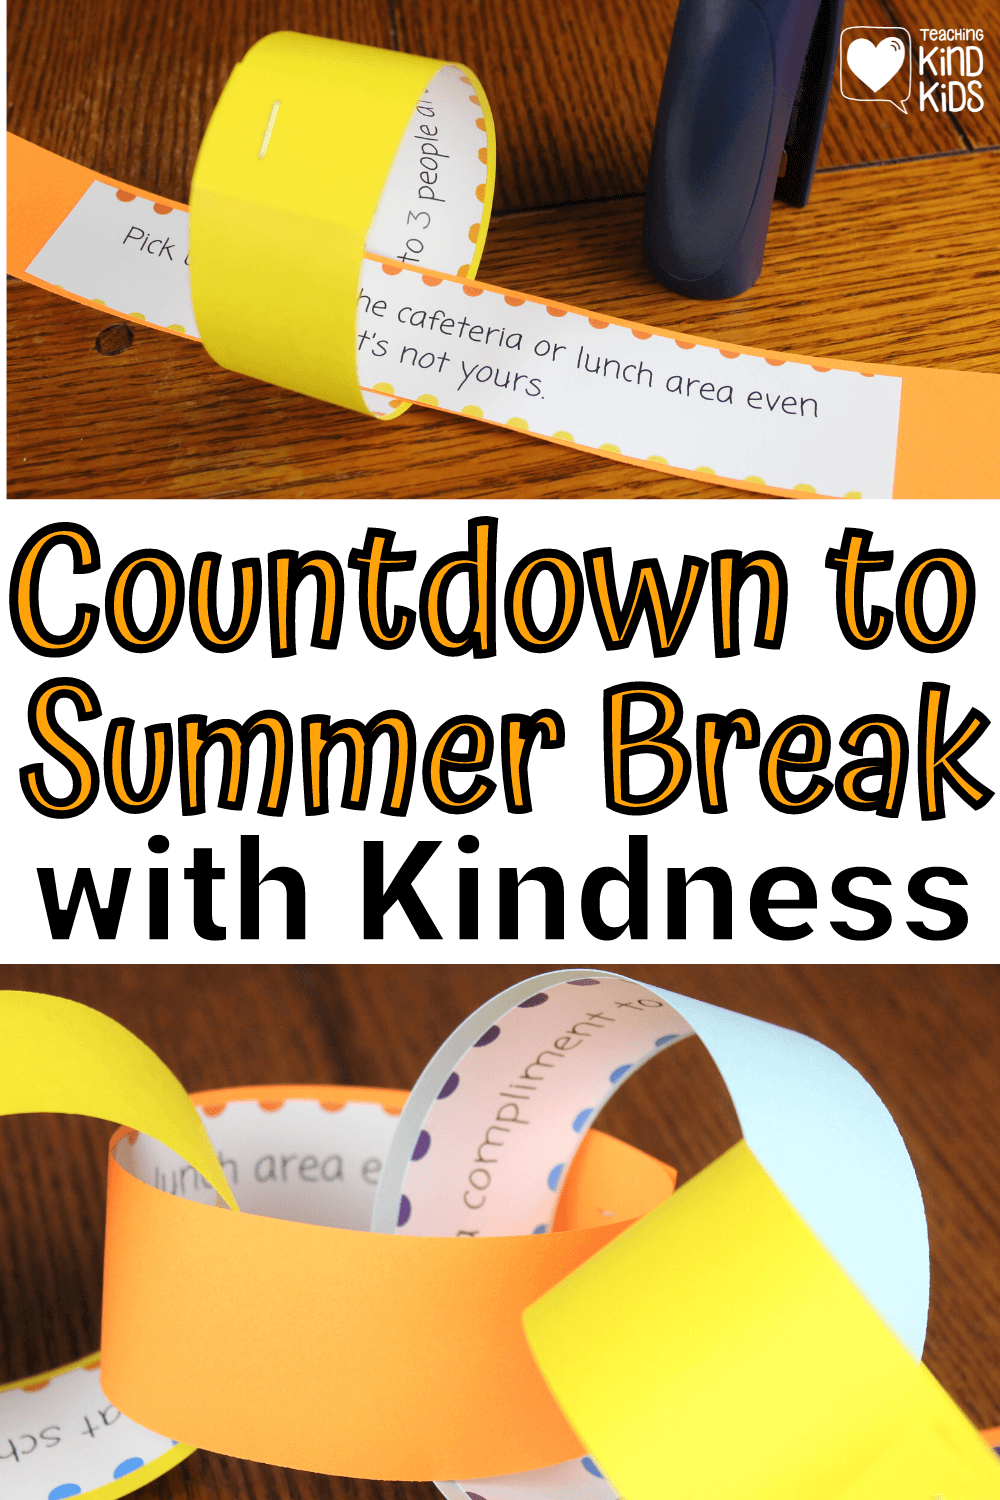 You can spread kindness as you countdown to summer break. 